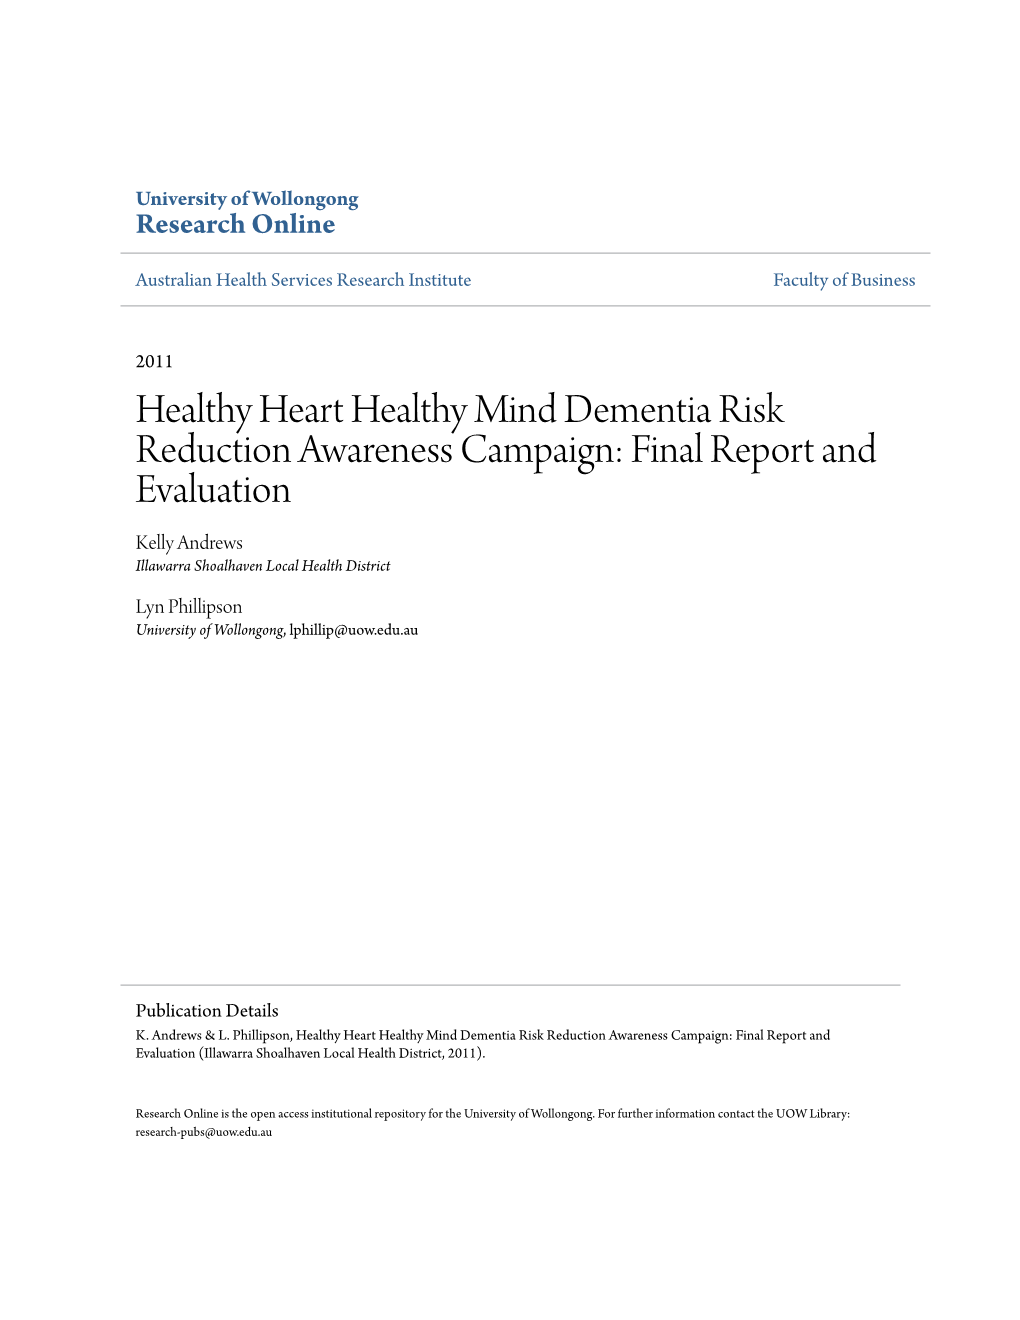 Healthy Heart Healthy Mind Dementia Risk Reduction Awareness Campaign: Final Report and Evaluation Kelly Andrews Illawarra Shoalhaven Local Health District